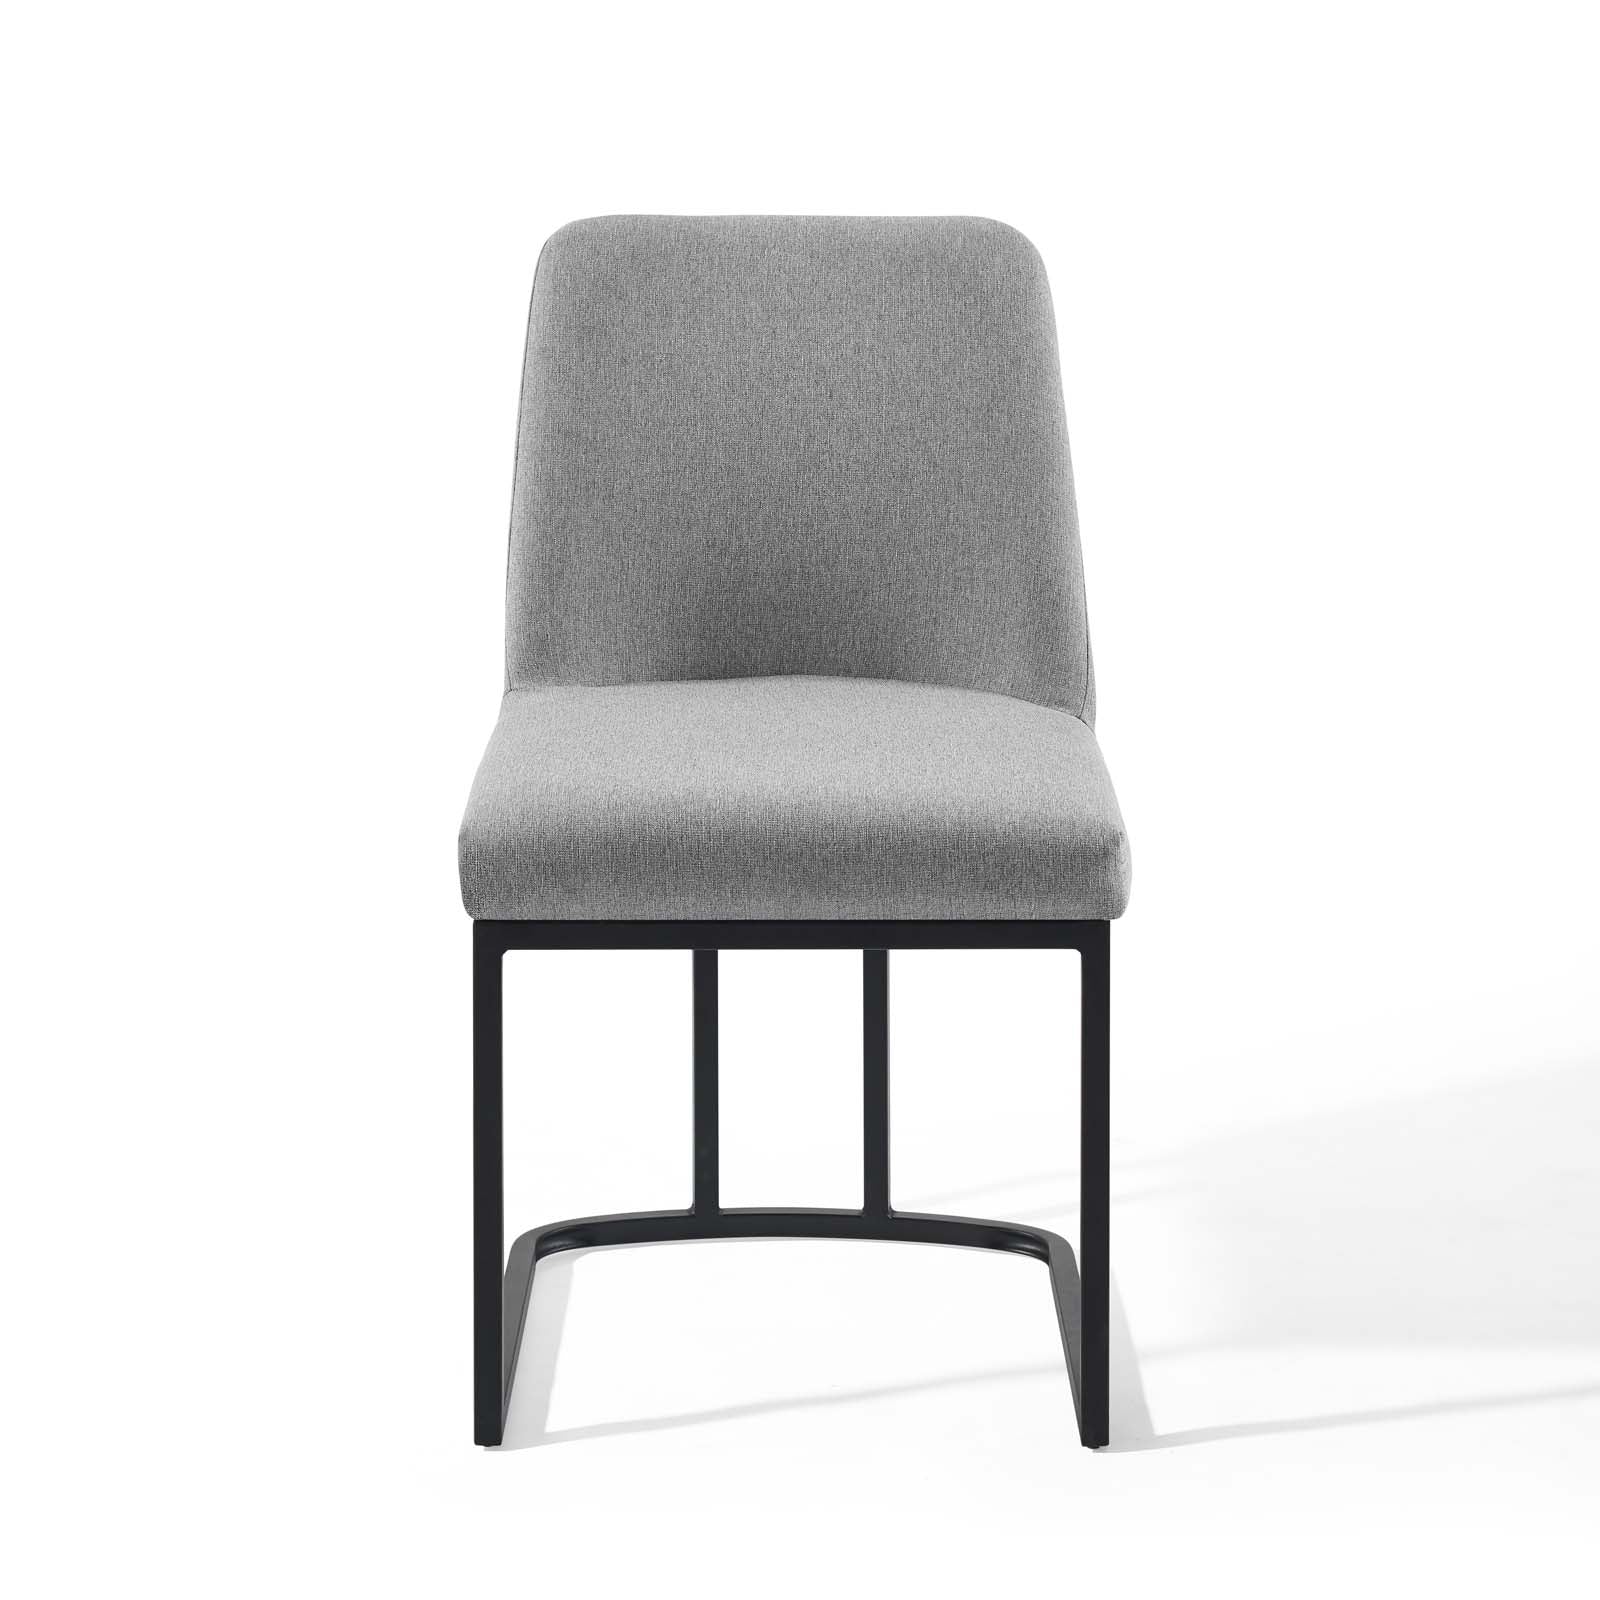 Modway Dining Chairs - Amplify Sled Base Upholstered Fabric Dining Side Chair Black Light Gray